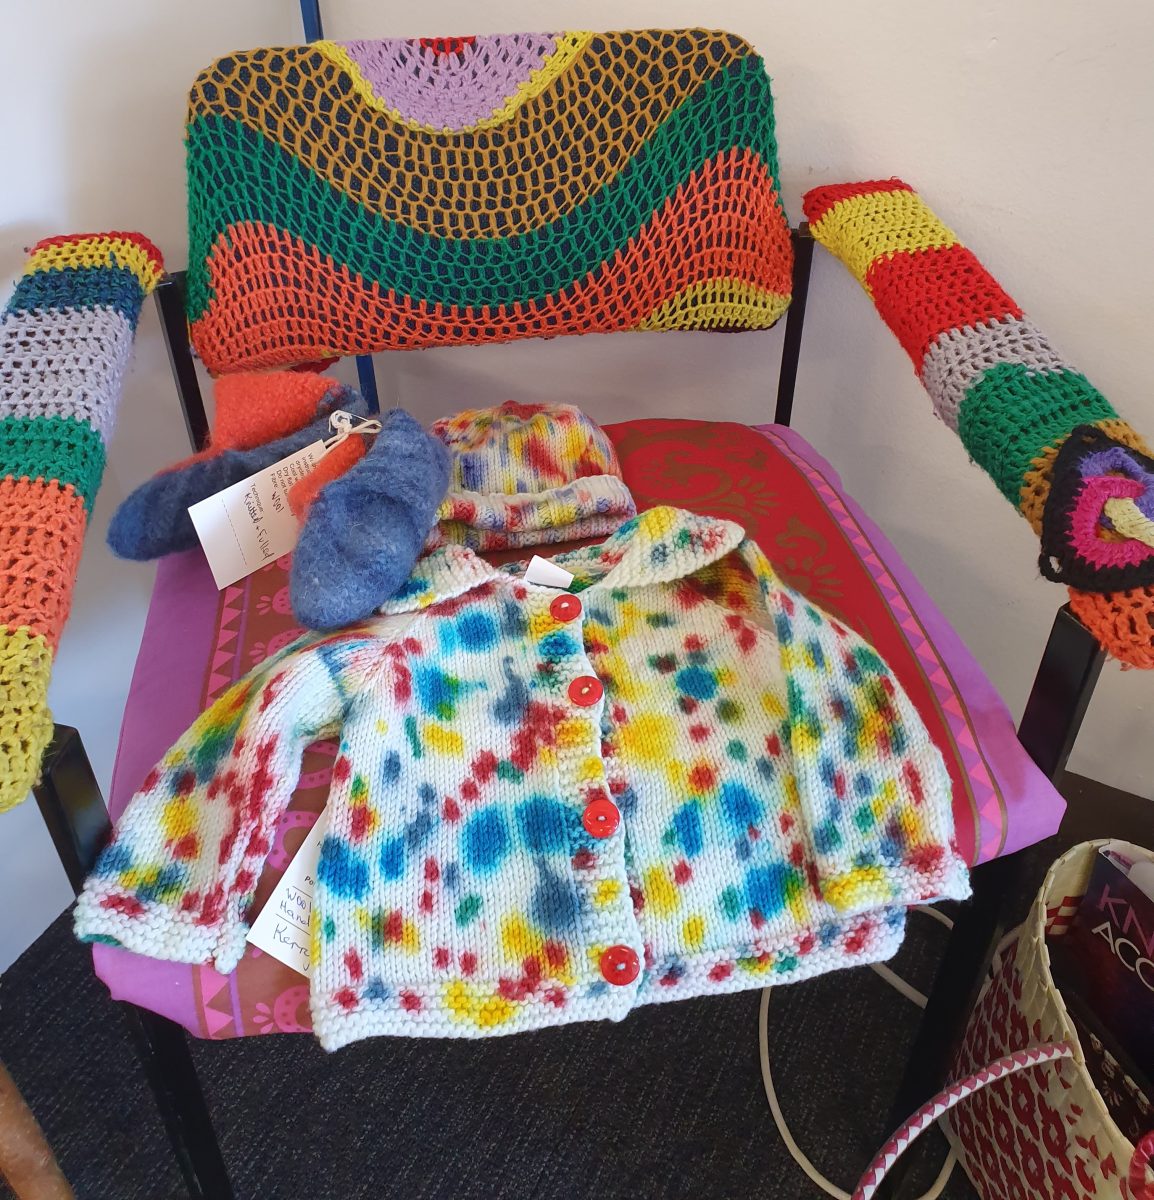 A samplke of Kerry Butt's knitted works.